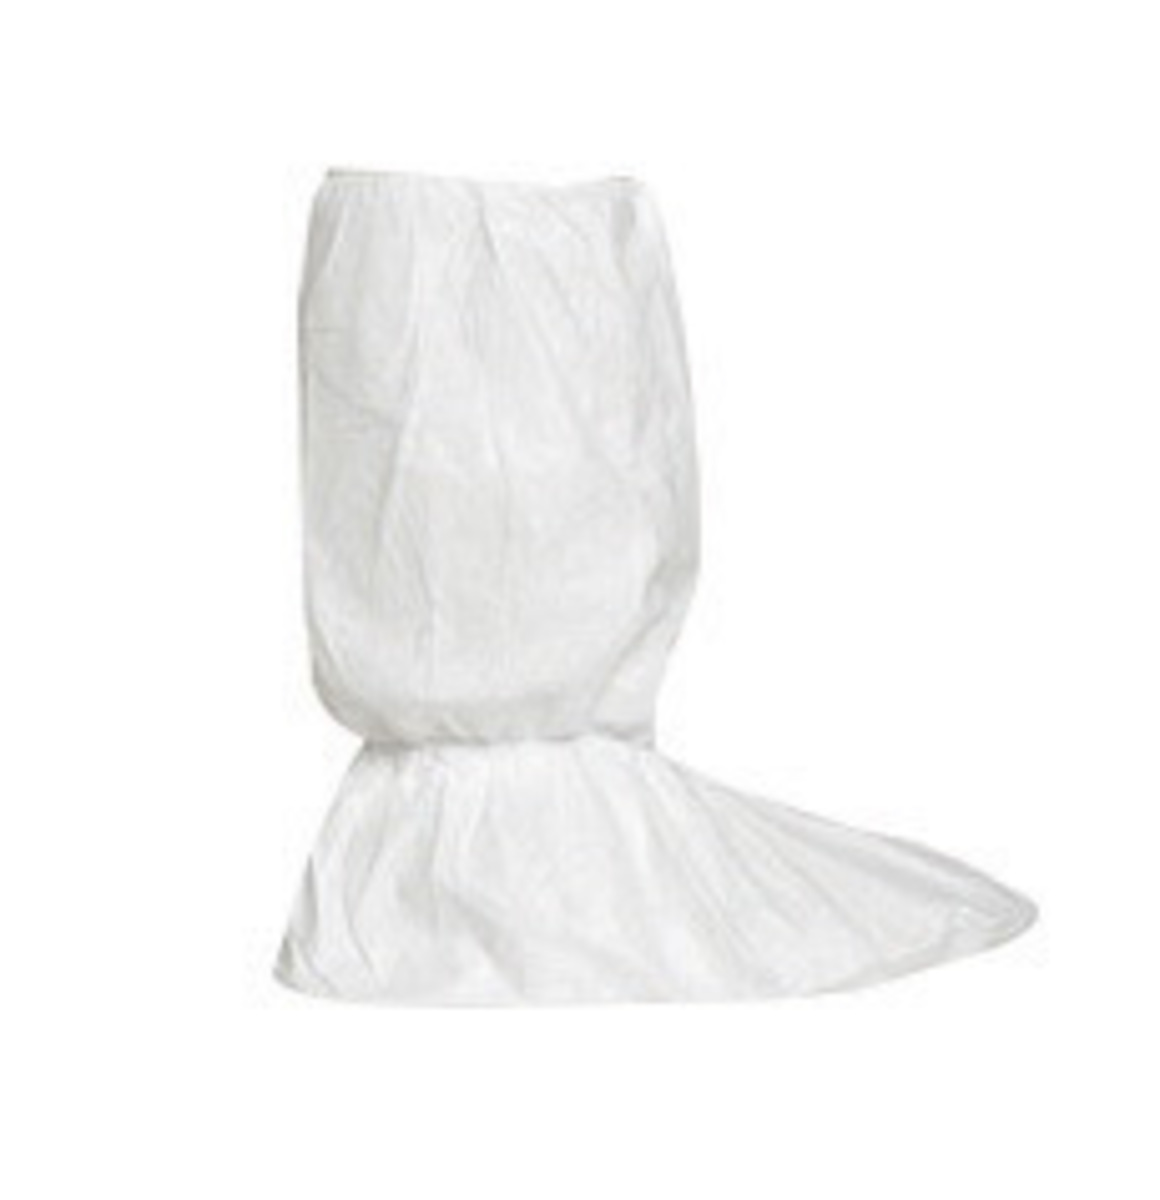 DuPont™ Medium White IsoClean® Tyvek® Disposable Shoe Cover (Availability restrictions apply.)